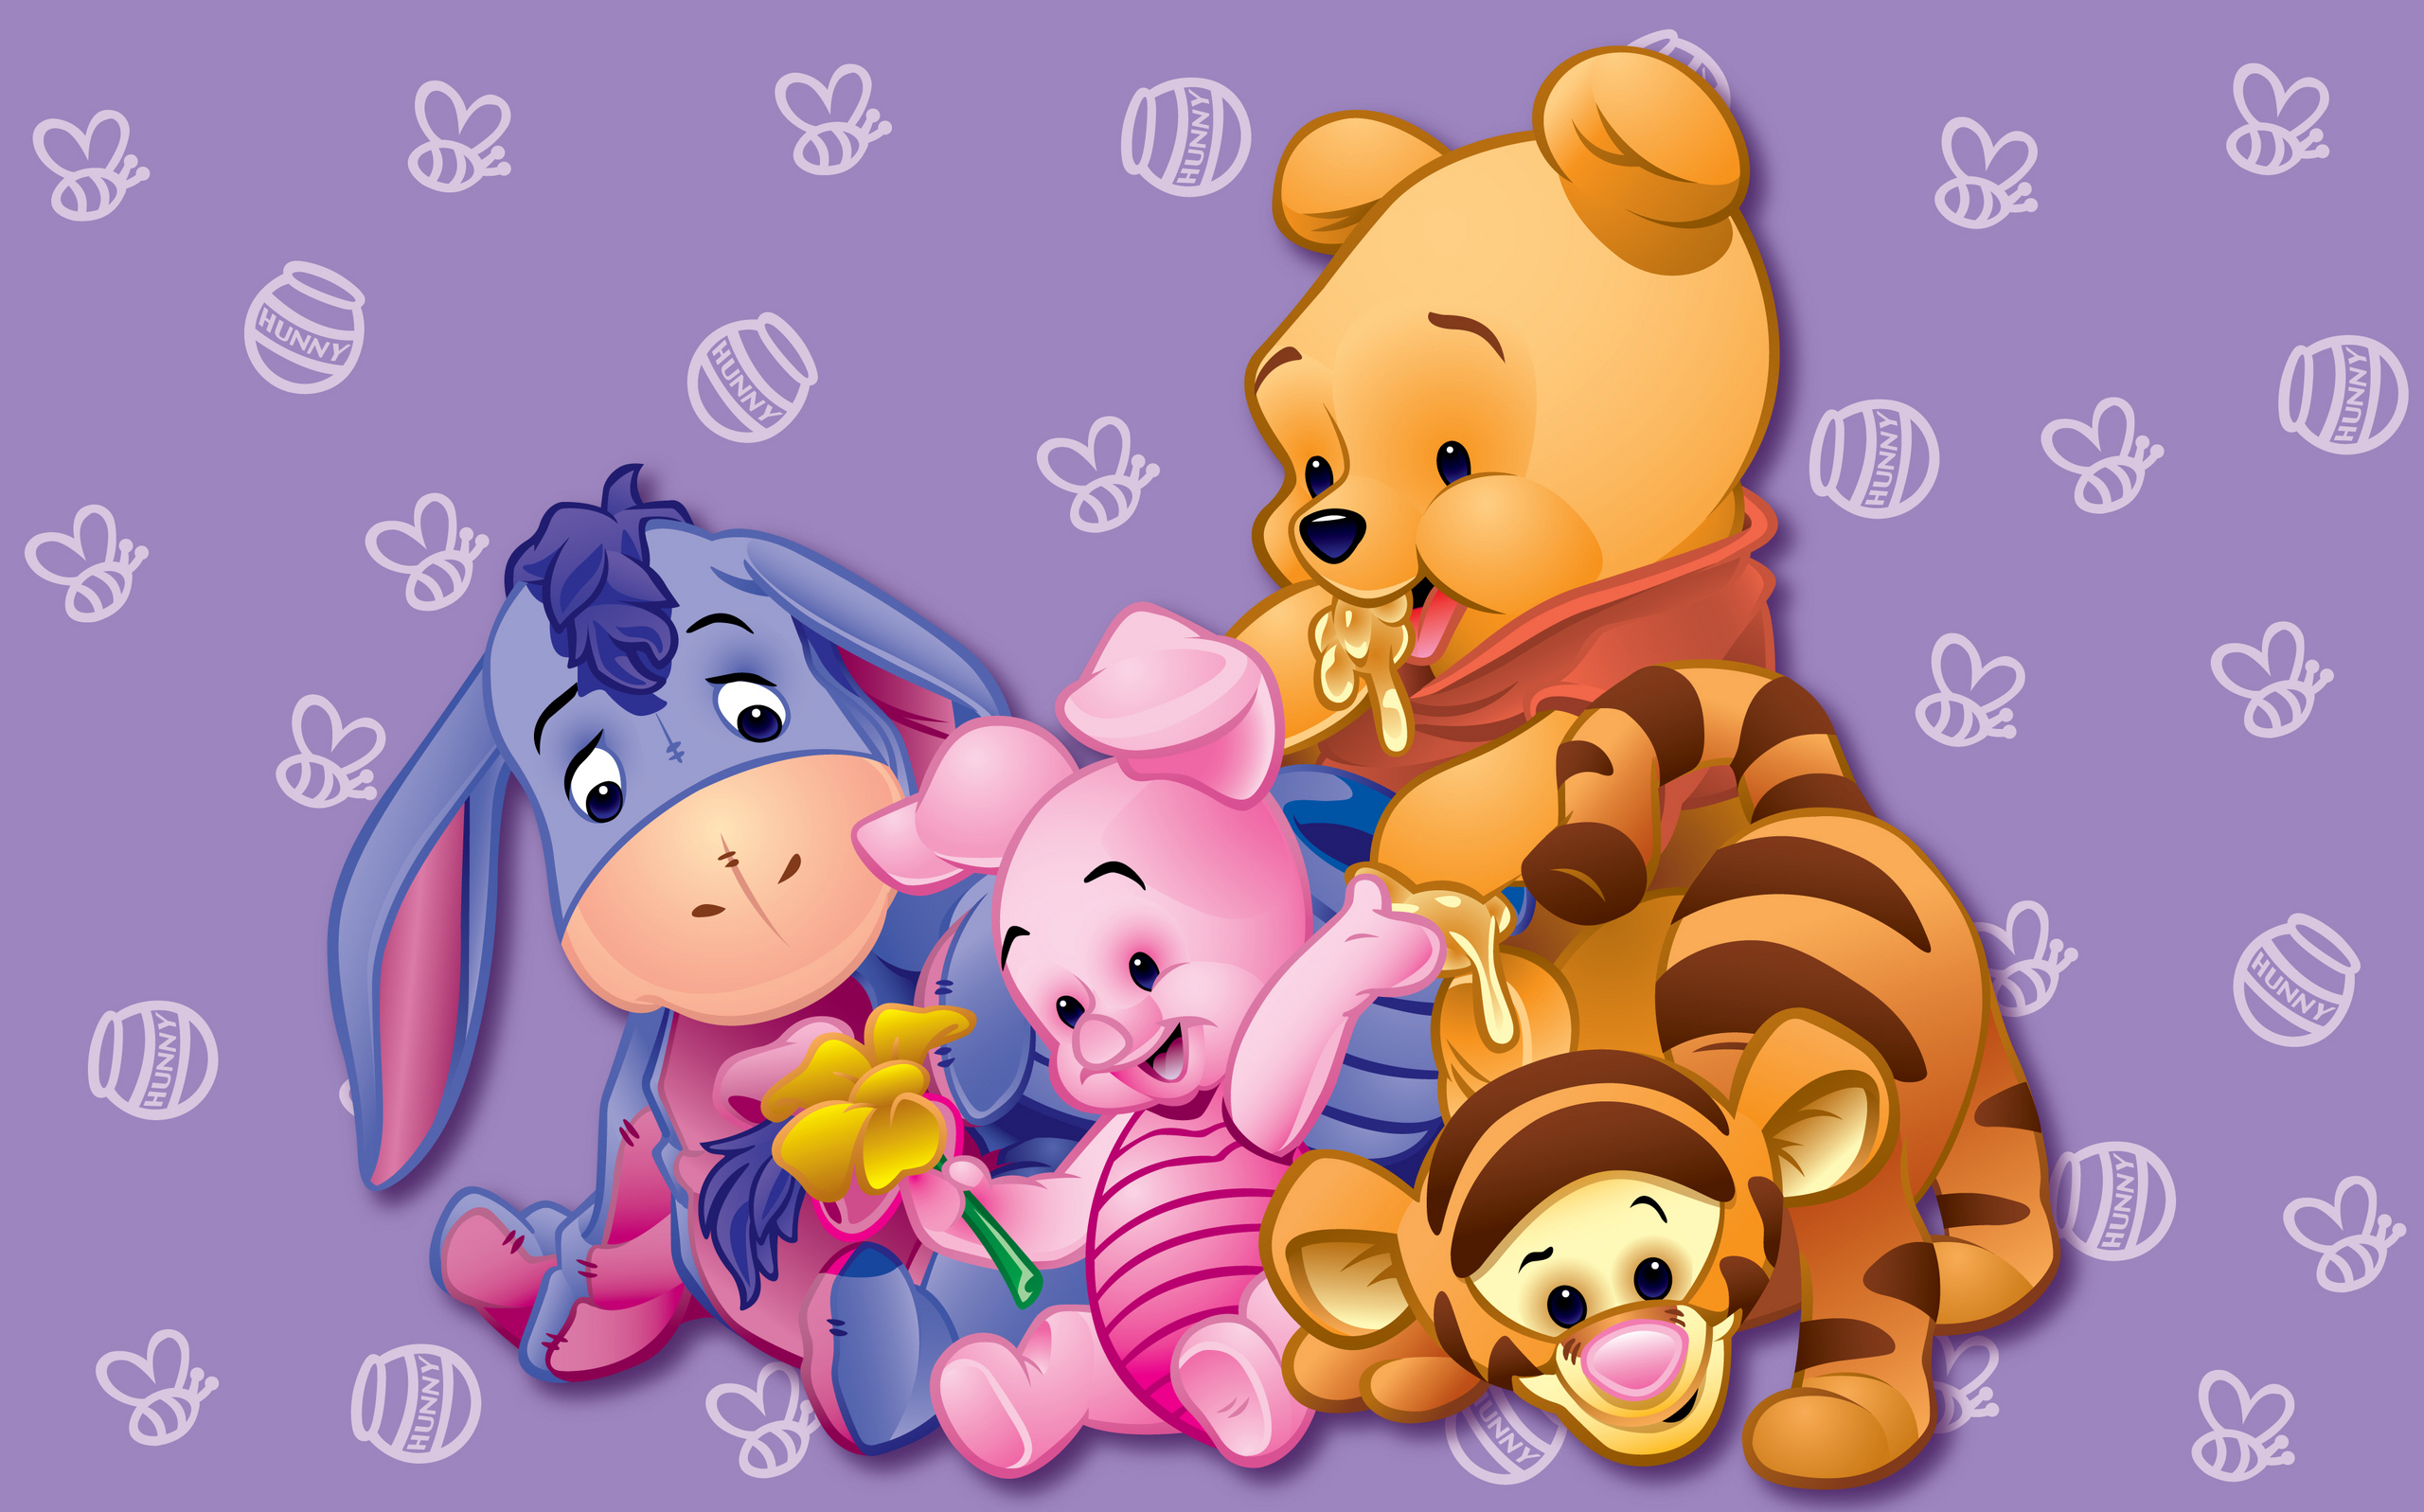 Baby Pooh Bear And Friends Wallpaper Image Amp Pictures Becuo